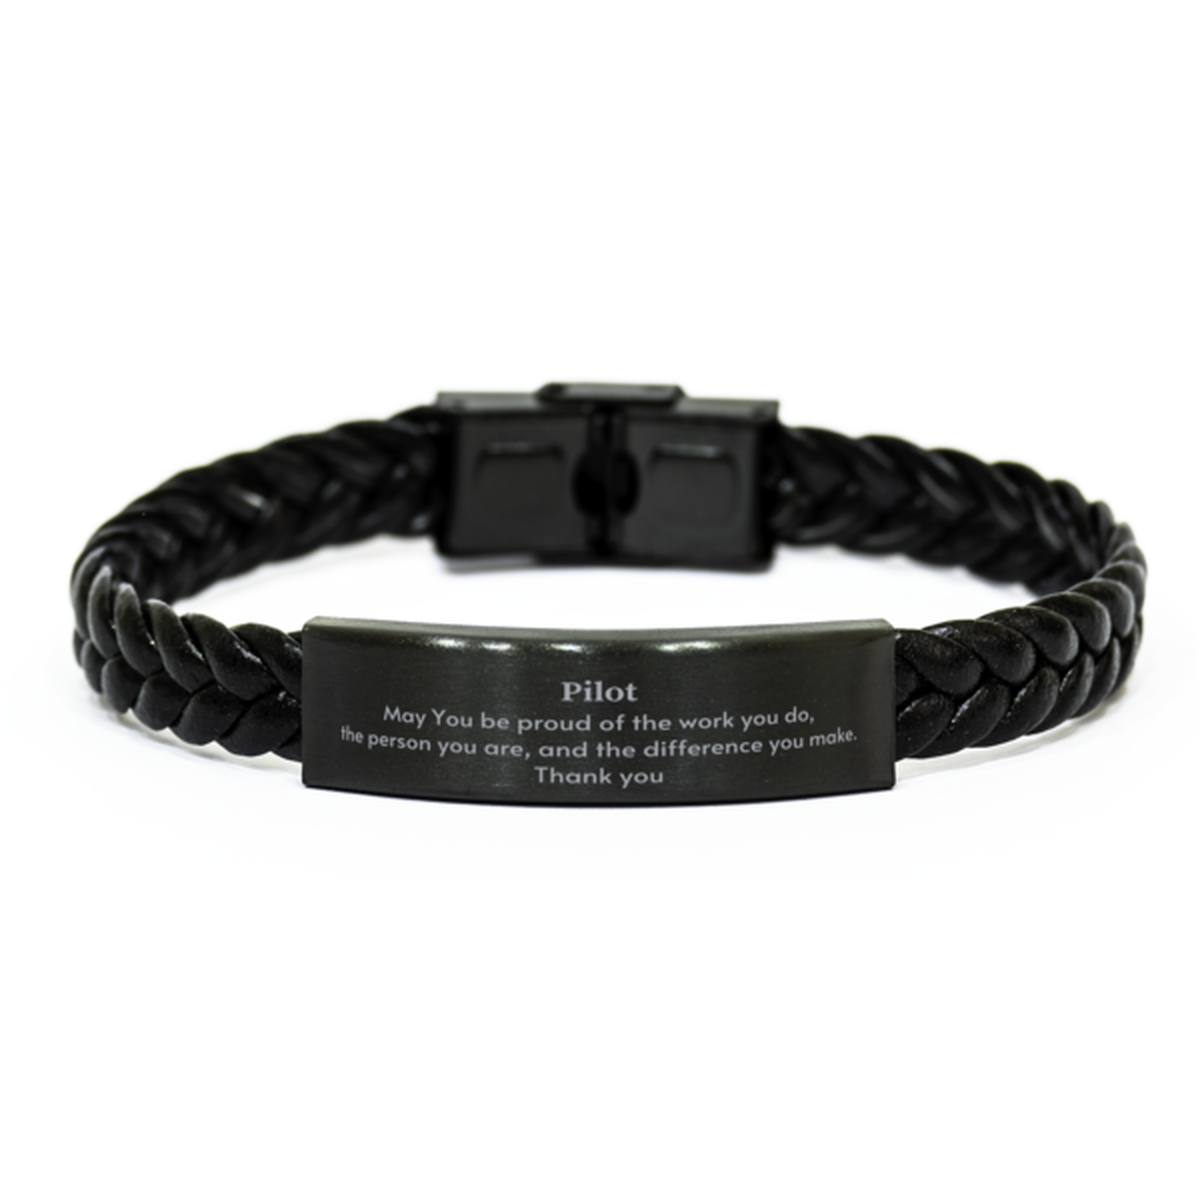 Heartwarming Braided Leather Bracelet Retirement Coworkers Gifts for Pilot, Pilot May You be proud of the work you do, the person you are Gifts for Boss Men Women Friends